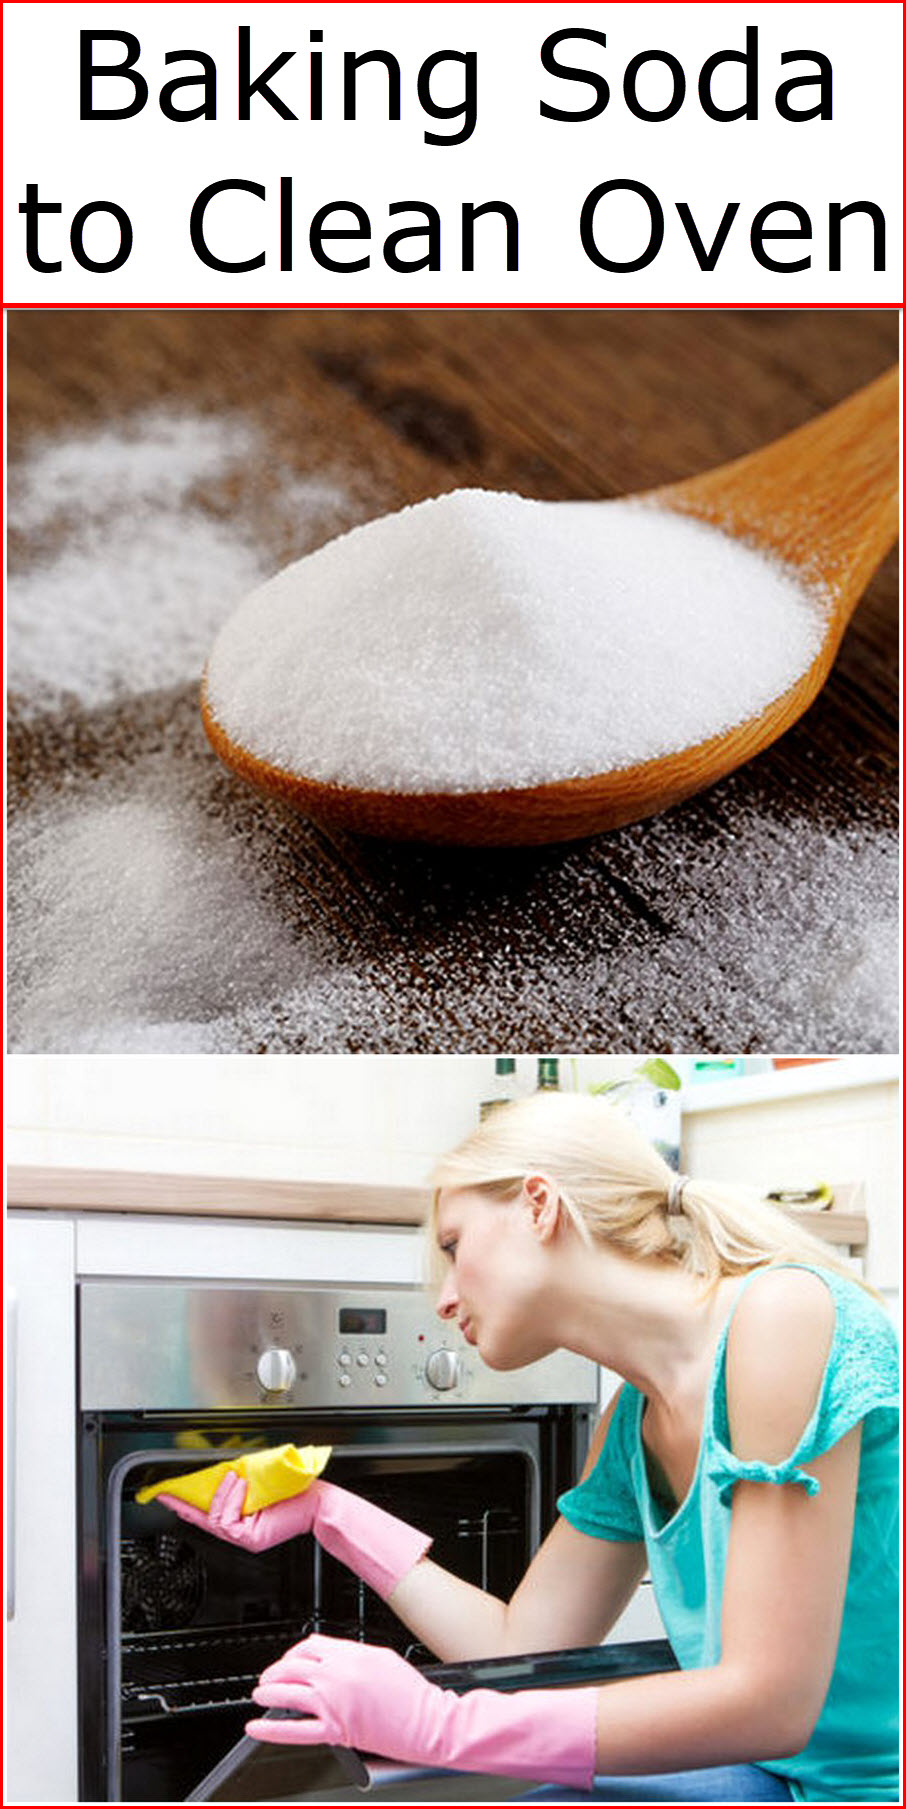 Baking Soda To Clean Oven 